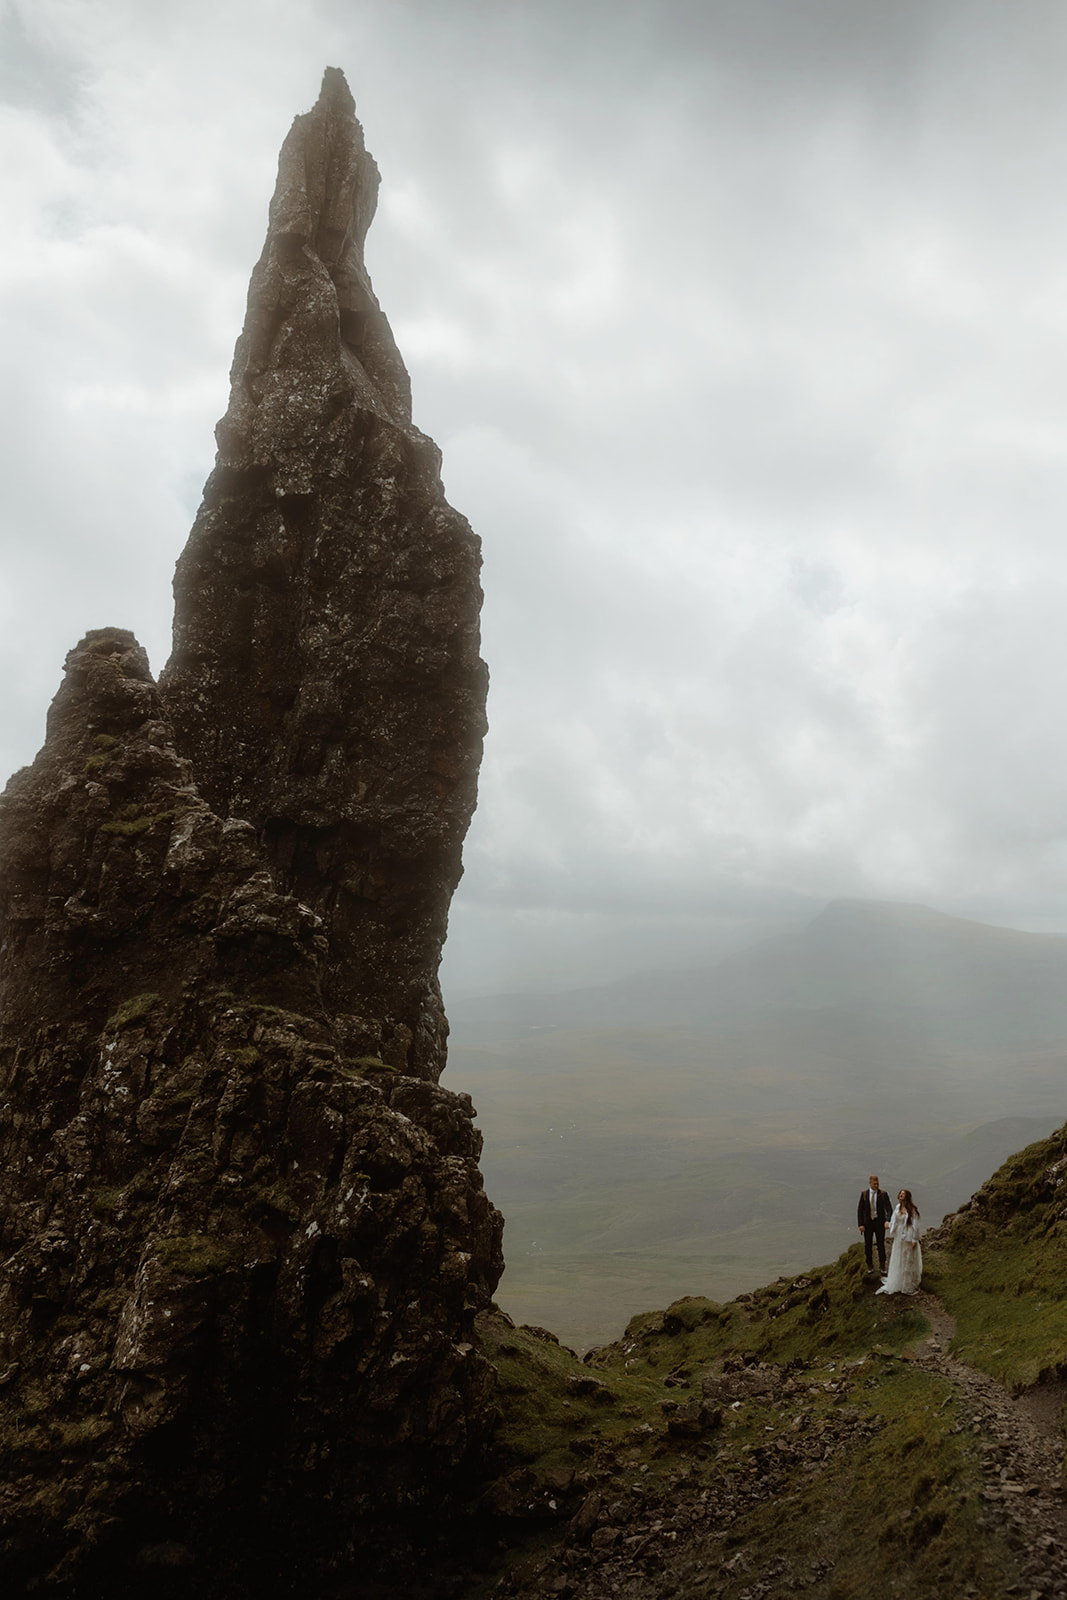 Elopement couple, Emma and Matthew walking hand in hand along the path next to the Needle at the Quiraing, Isle of Skye